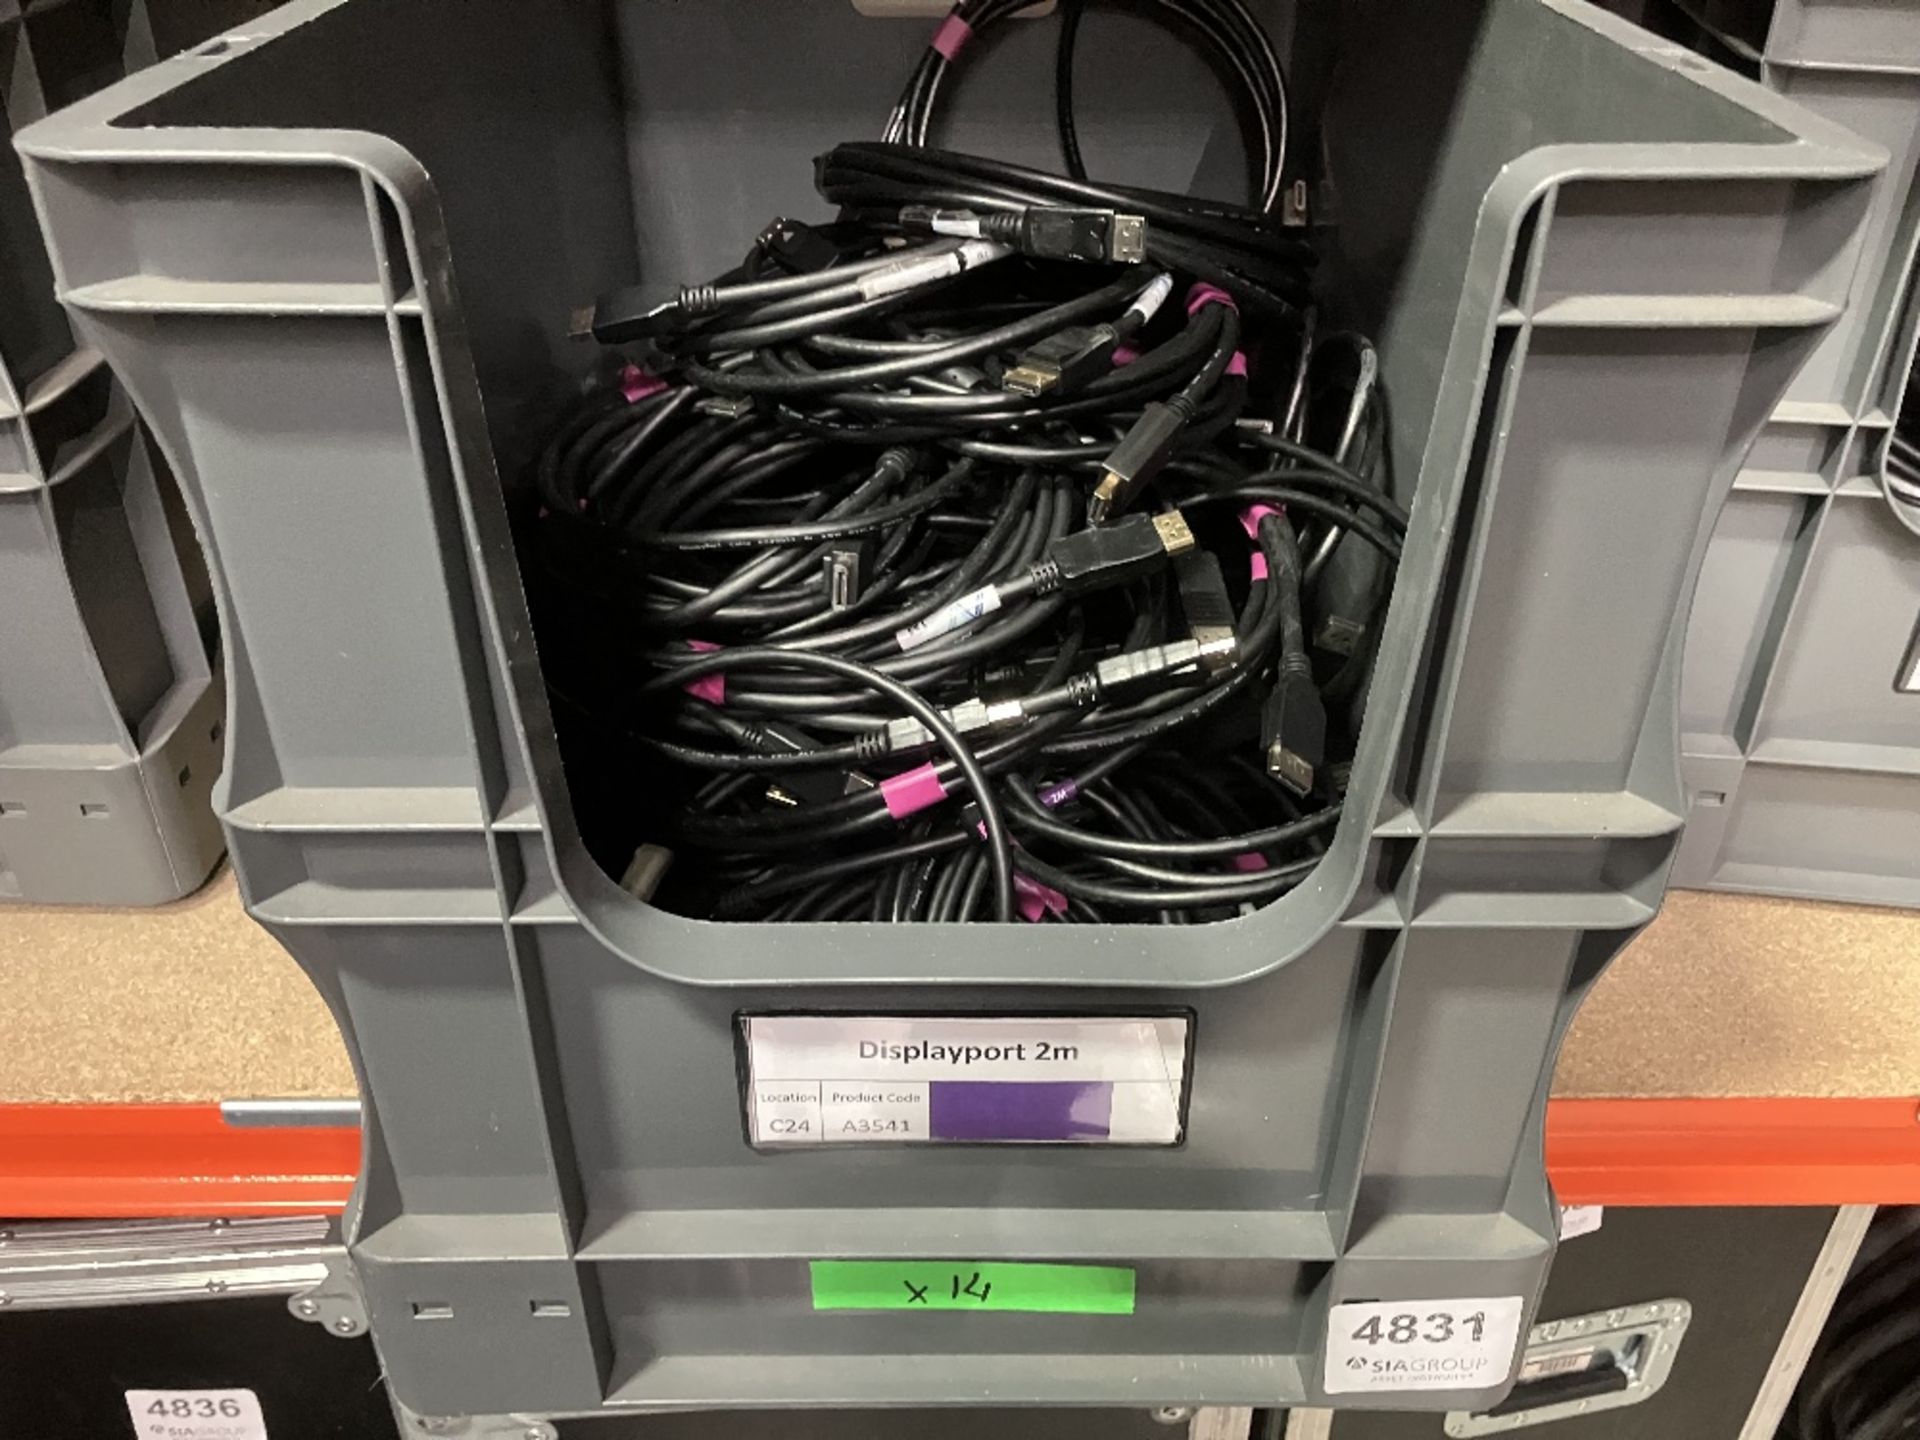 Large Quantity of 2m DisplayPort Cables With Plastic Lin Bin